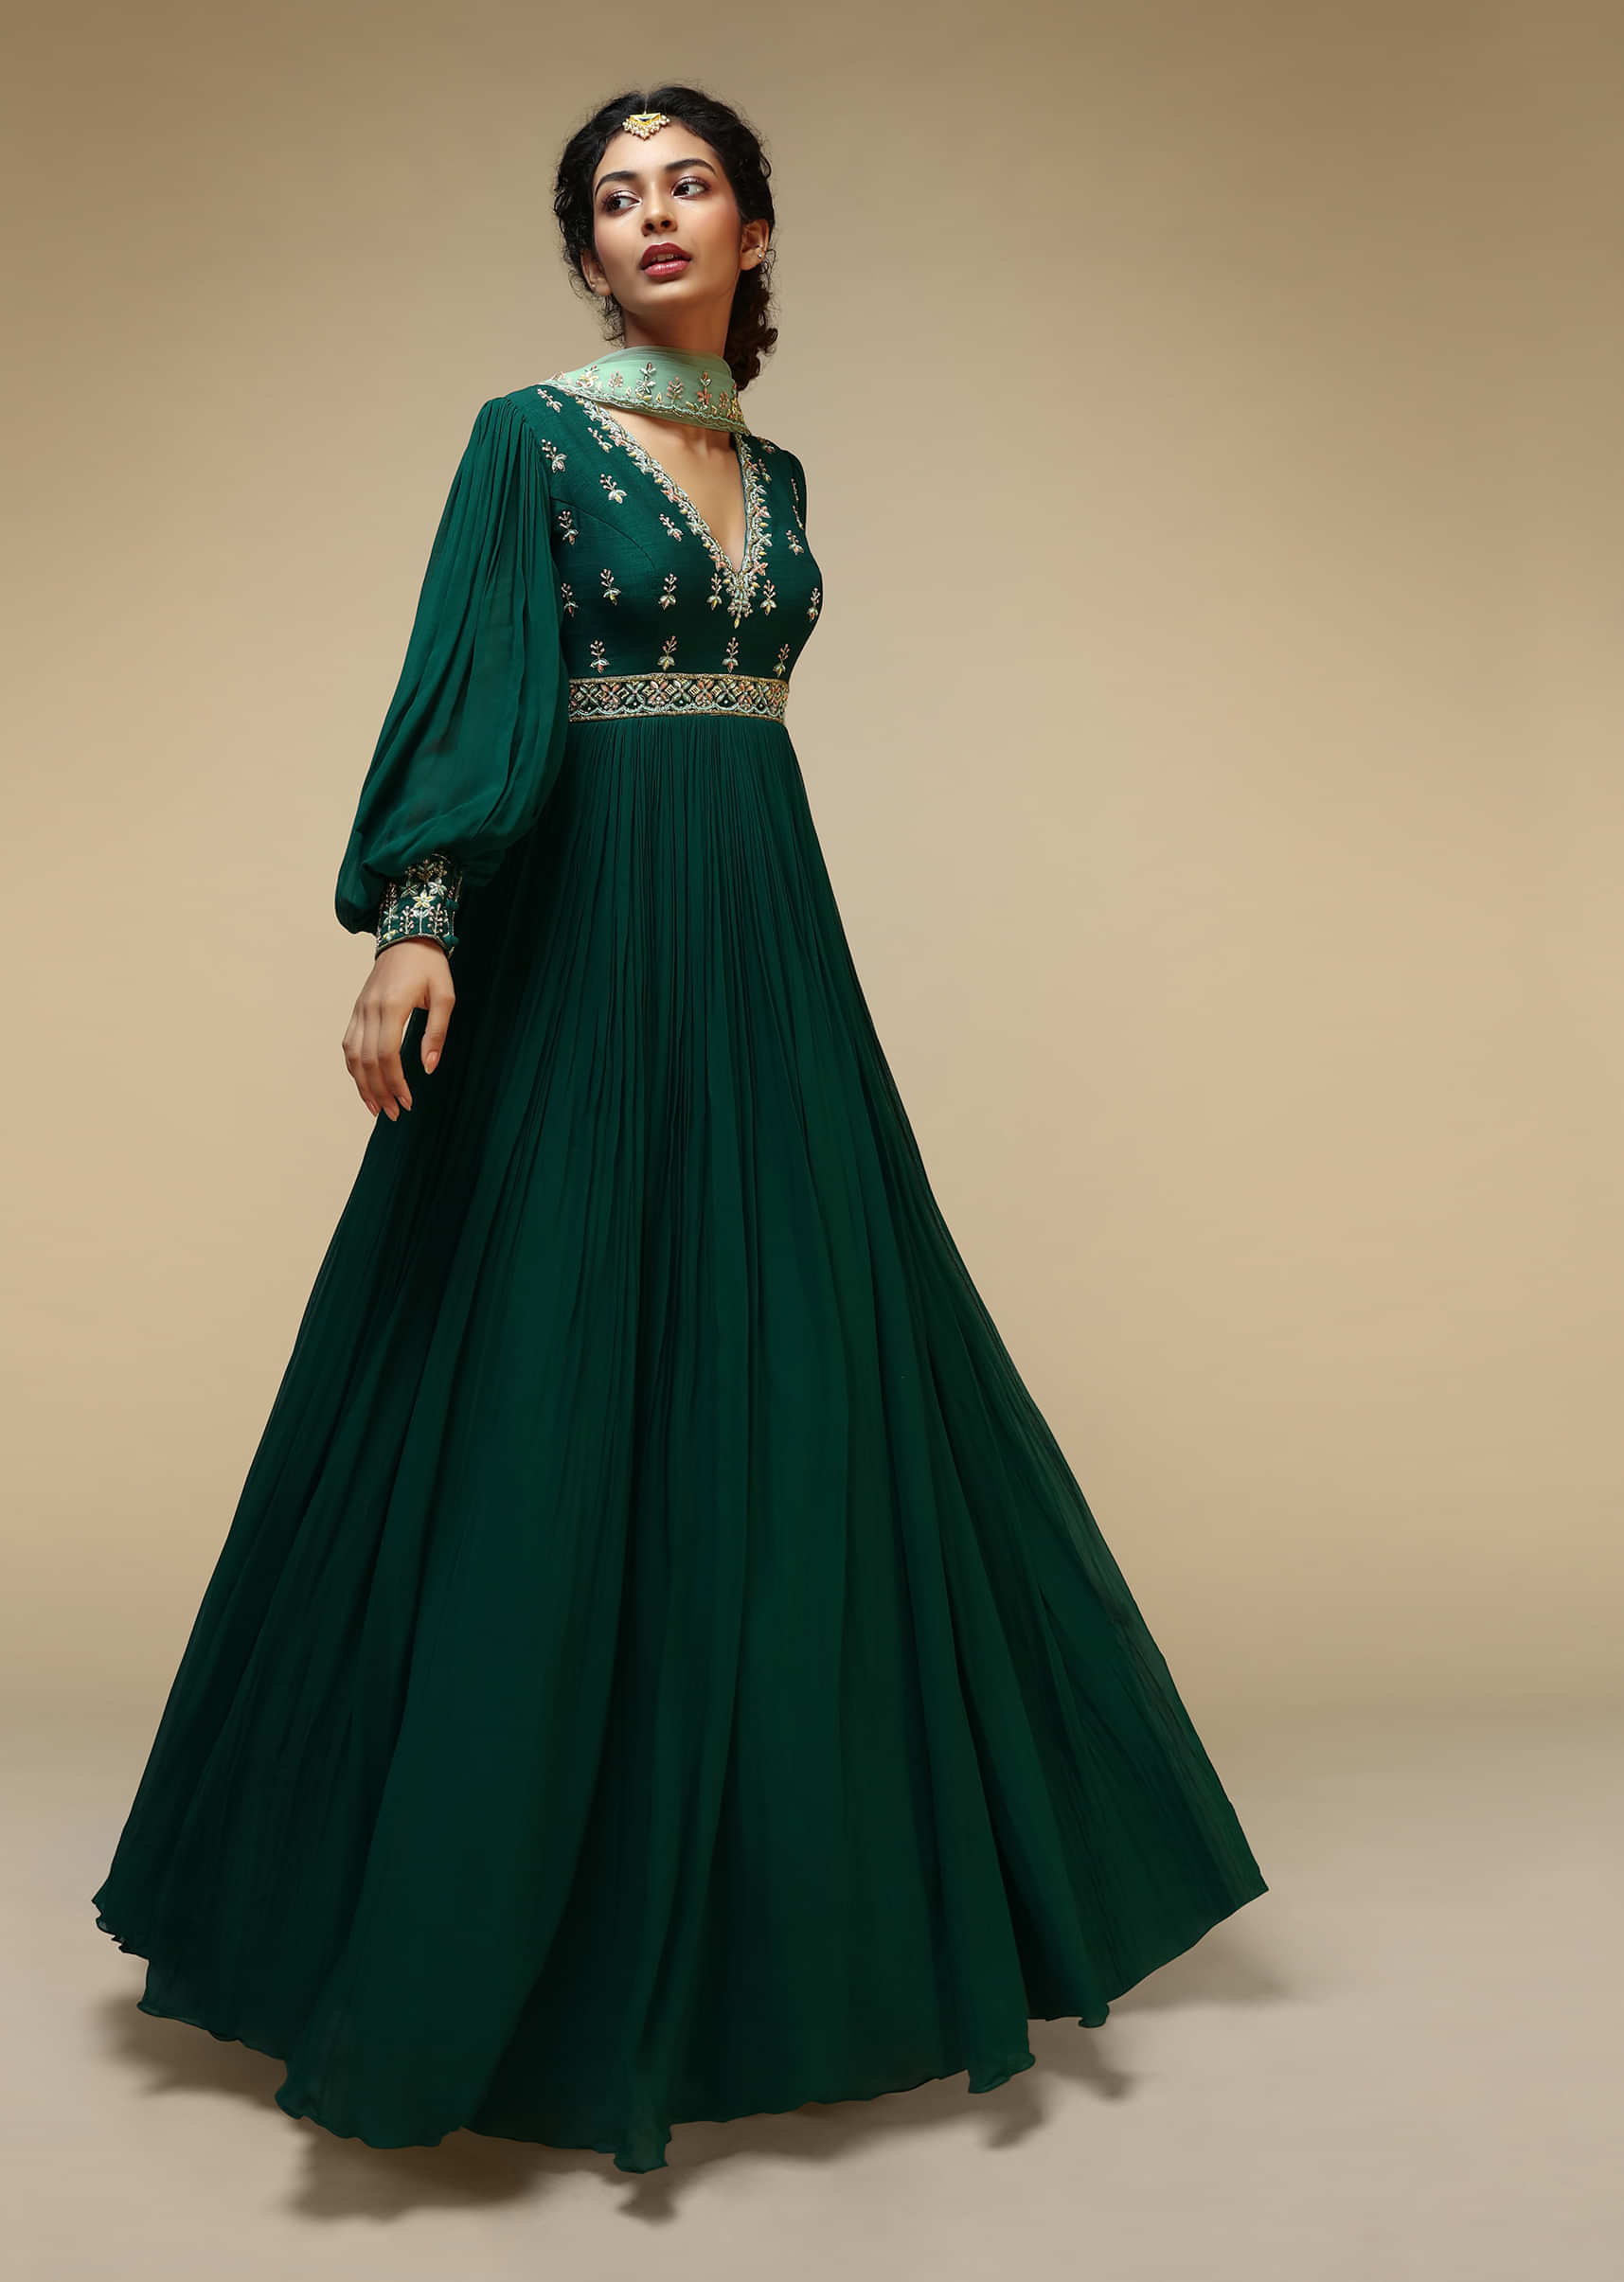 Bottle Green Anarkali Suit With Balloon Sleeves And Hand Embroidered Buttis Using Multi Colored Sequins And Beads  